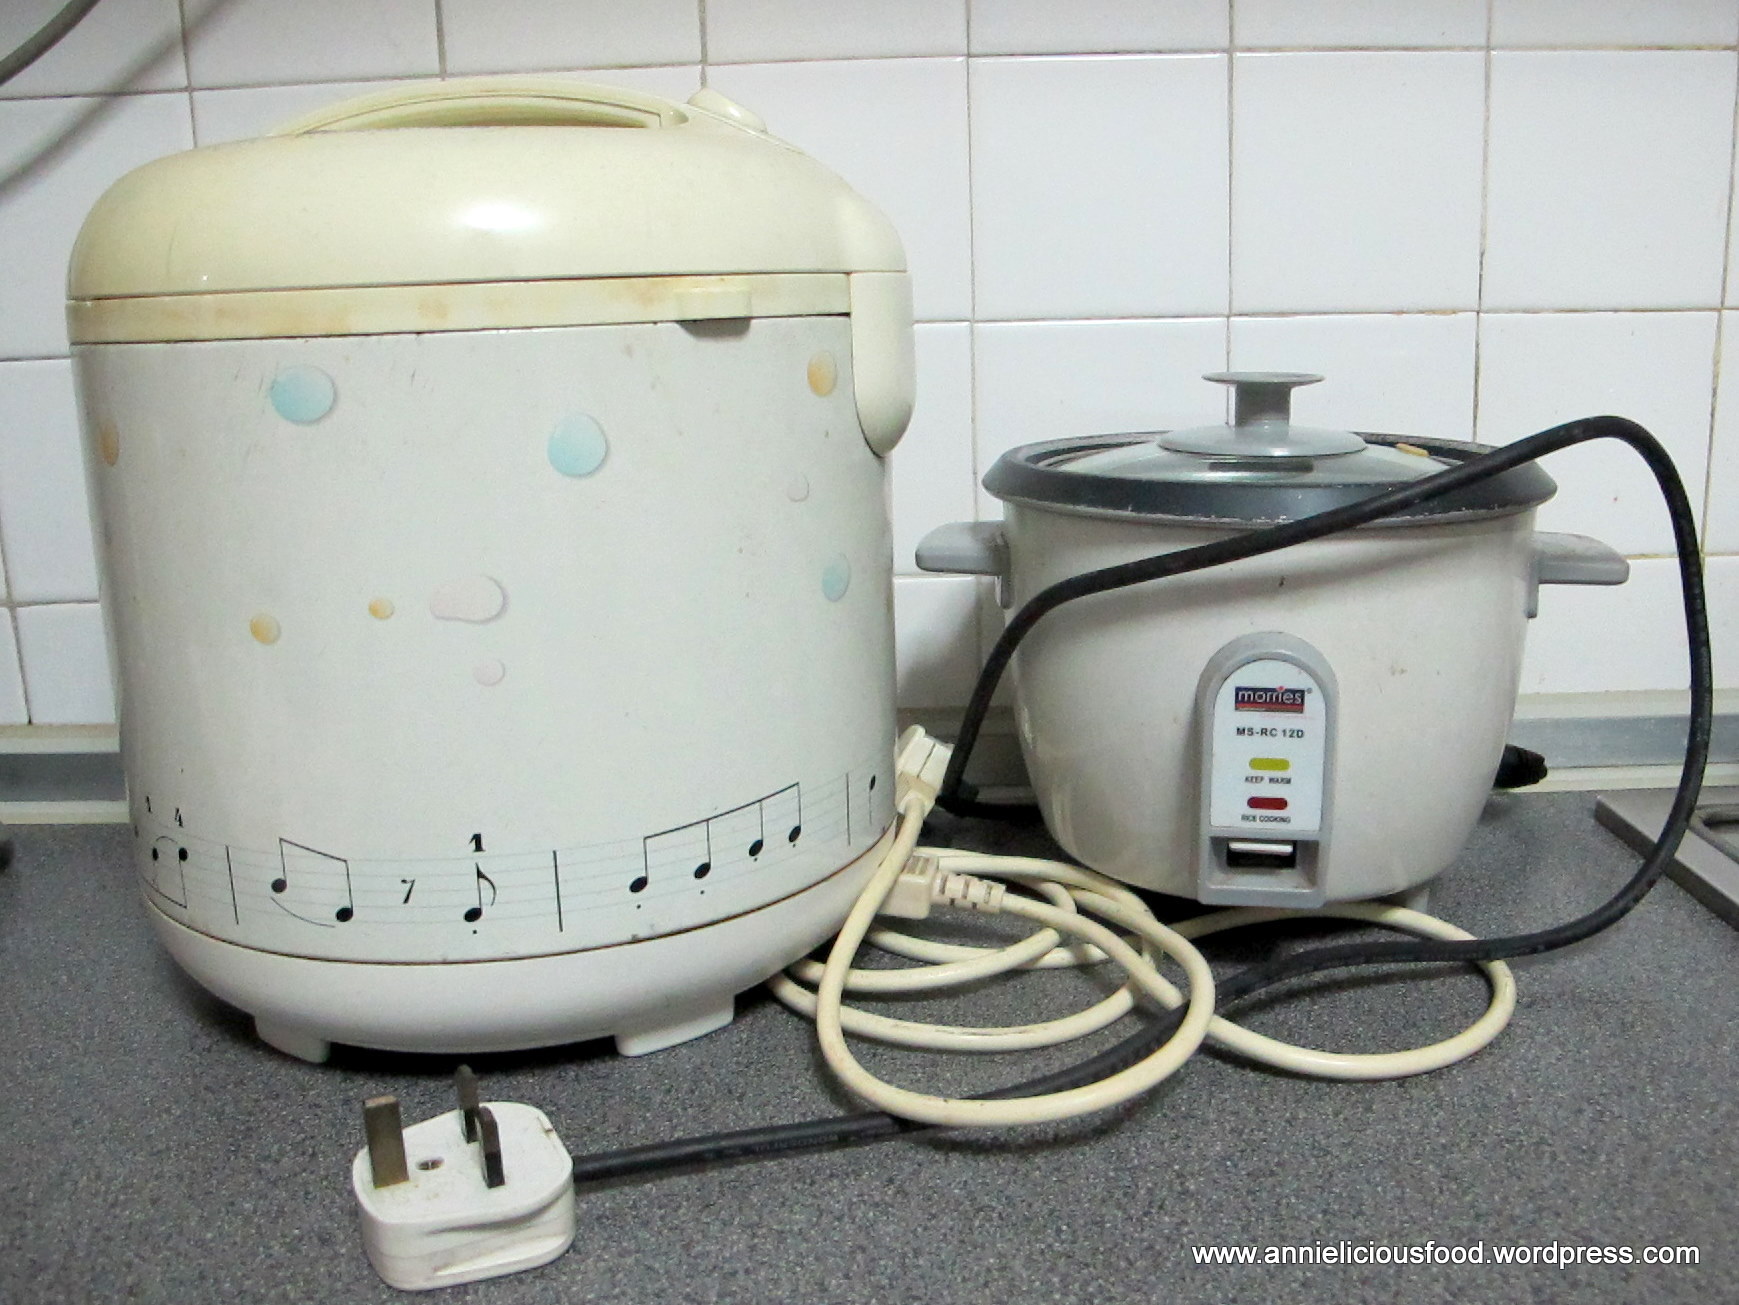 Review : My Zojirushi NP-HBQ10 Rice Cooker (Part 1)